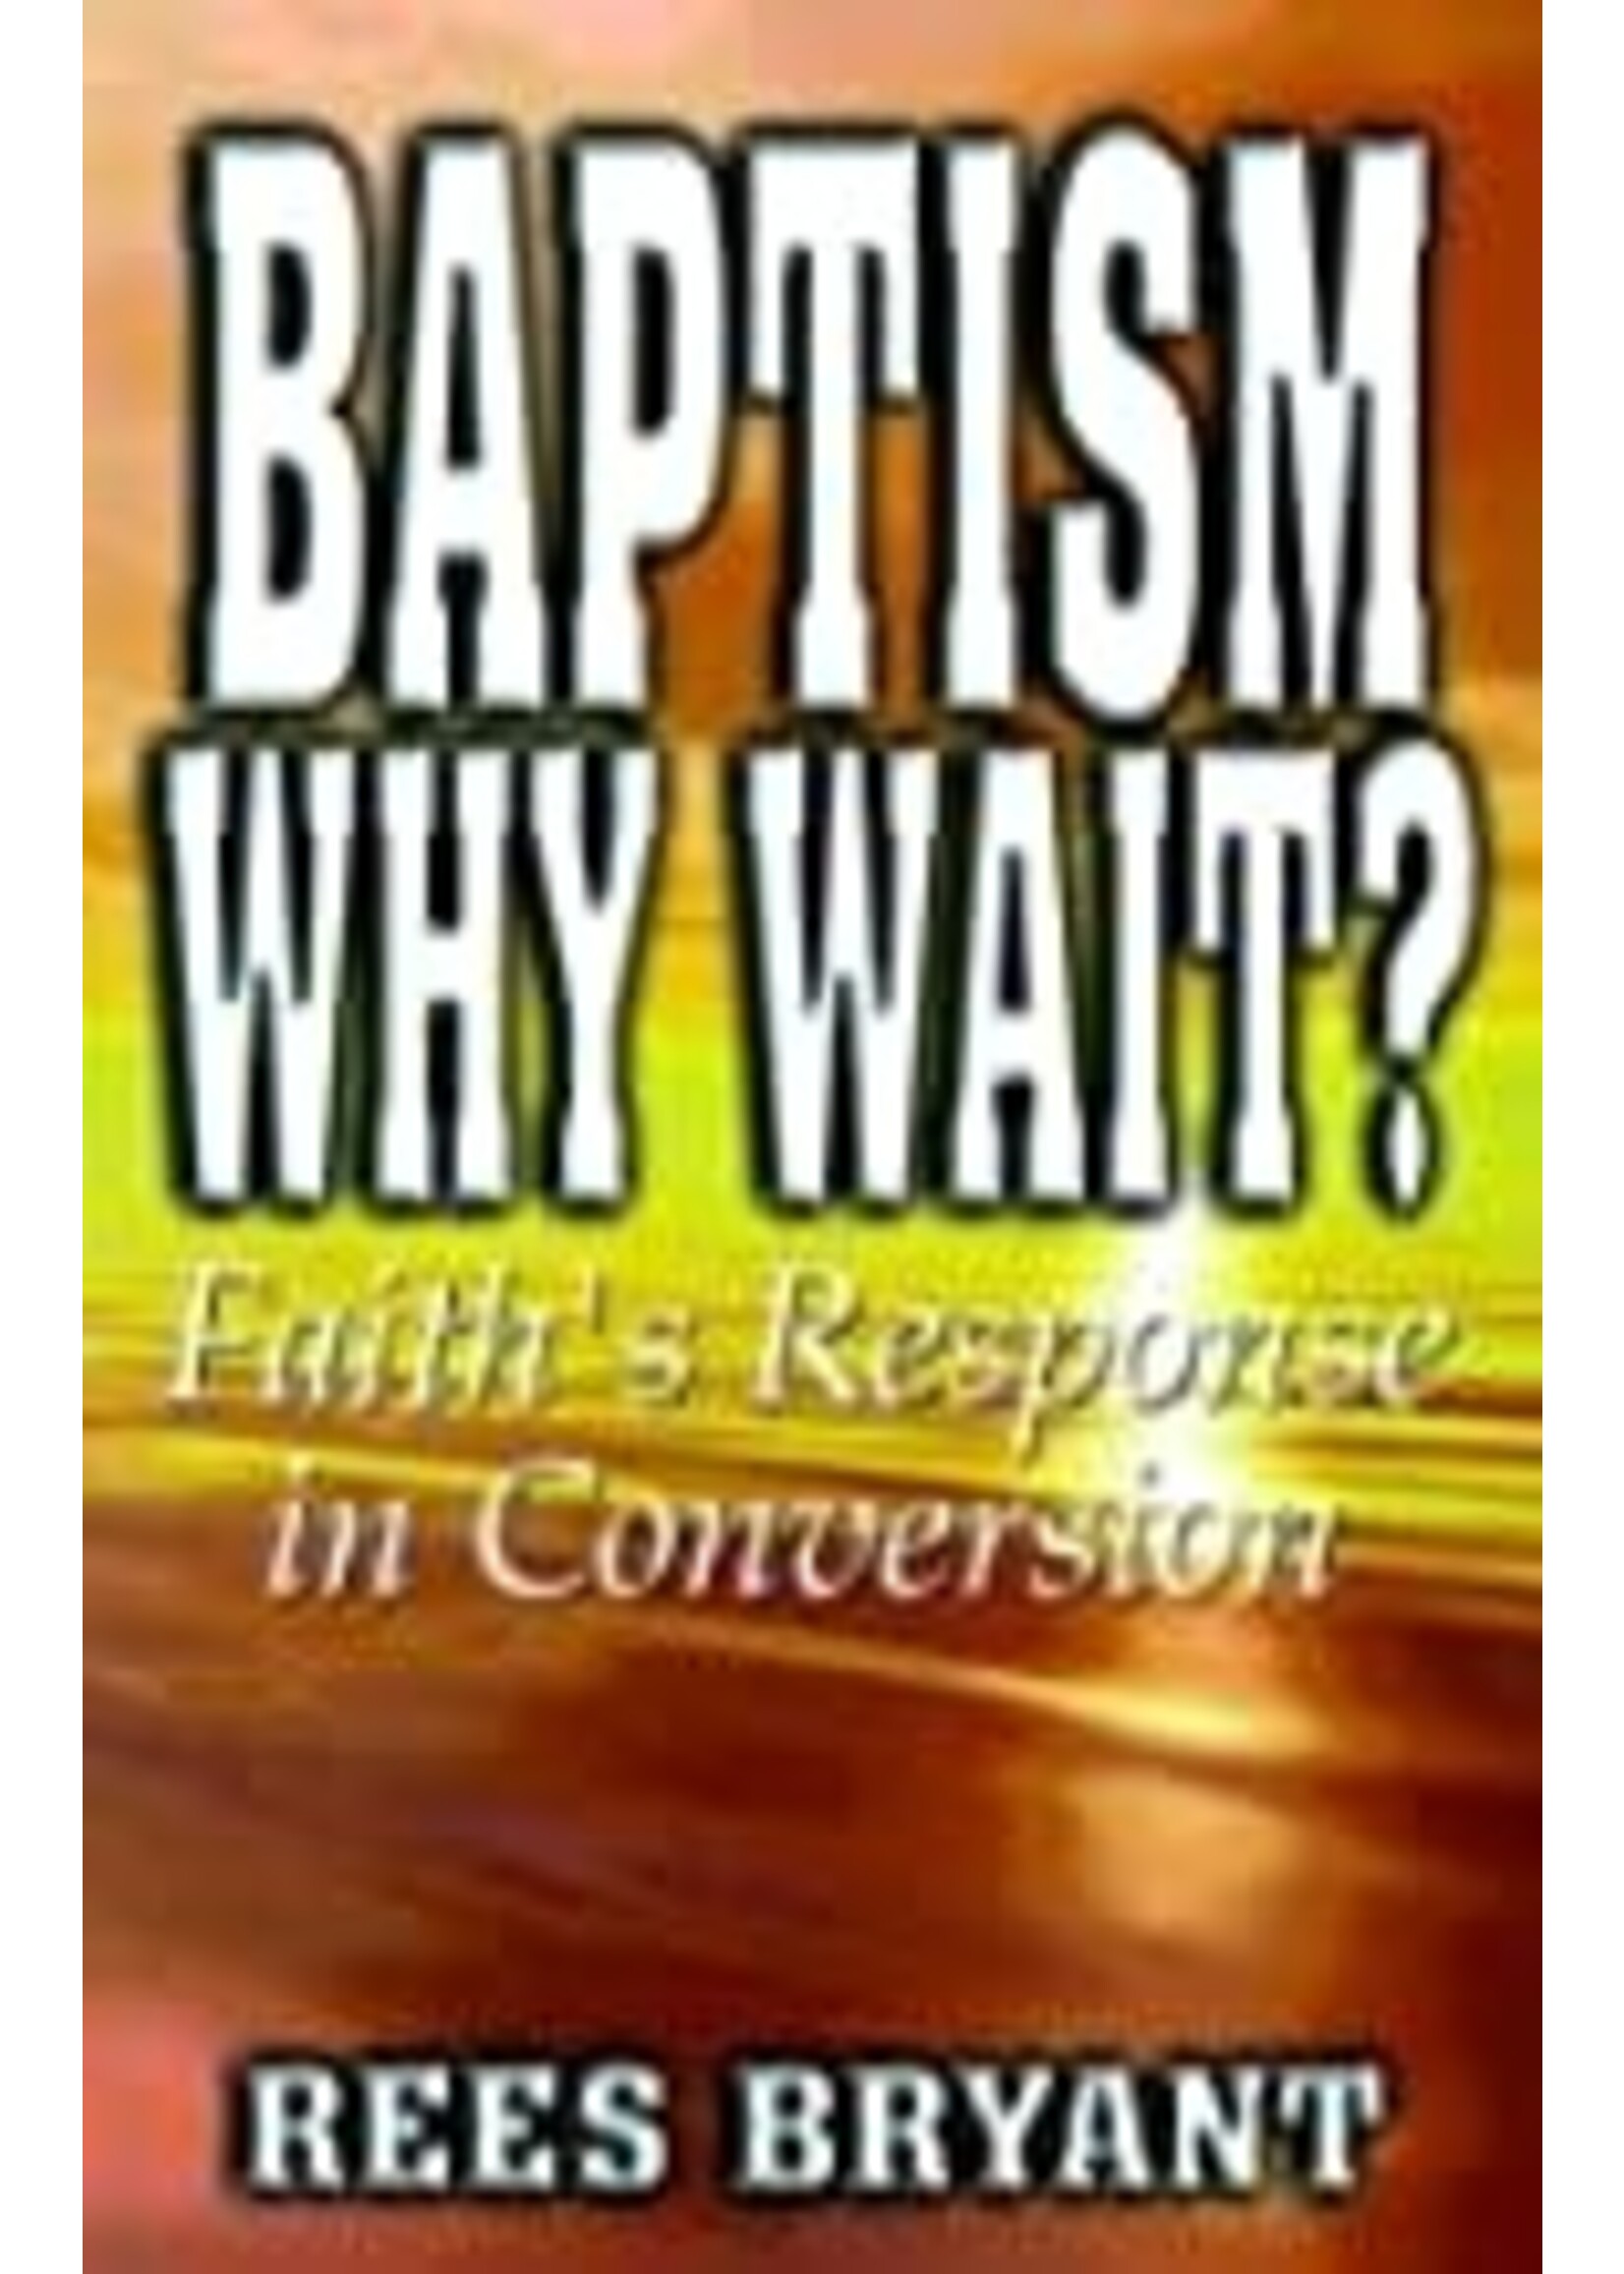 Baptism Why Wait? Faith's Response in Conversion